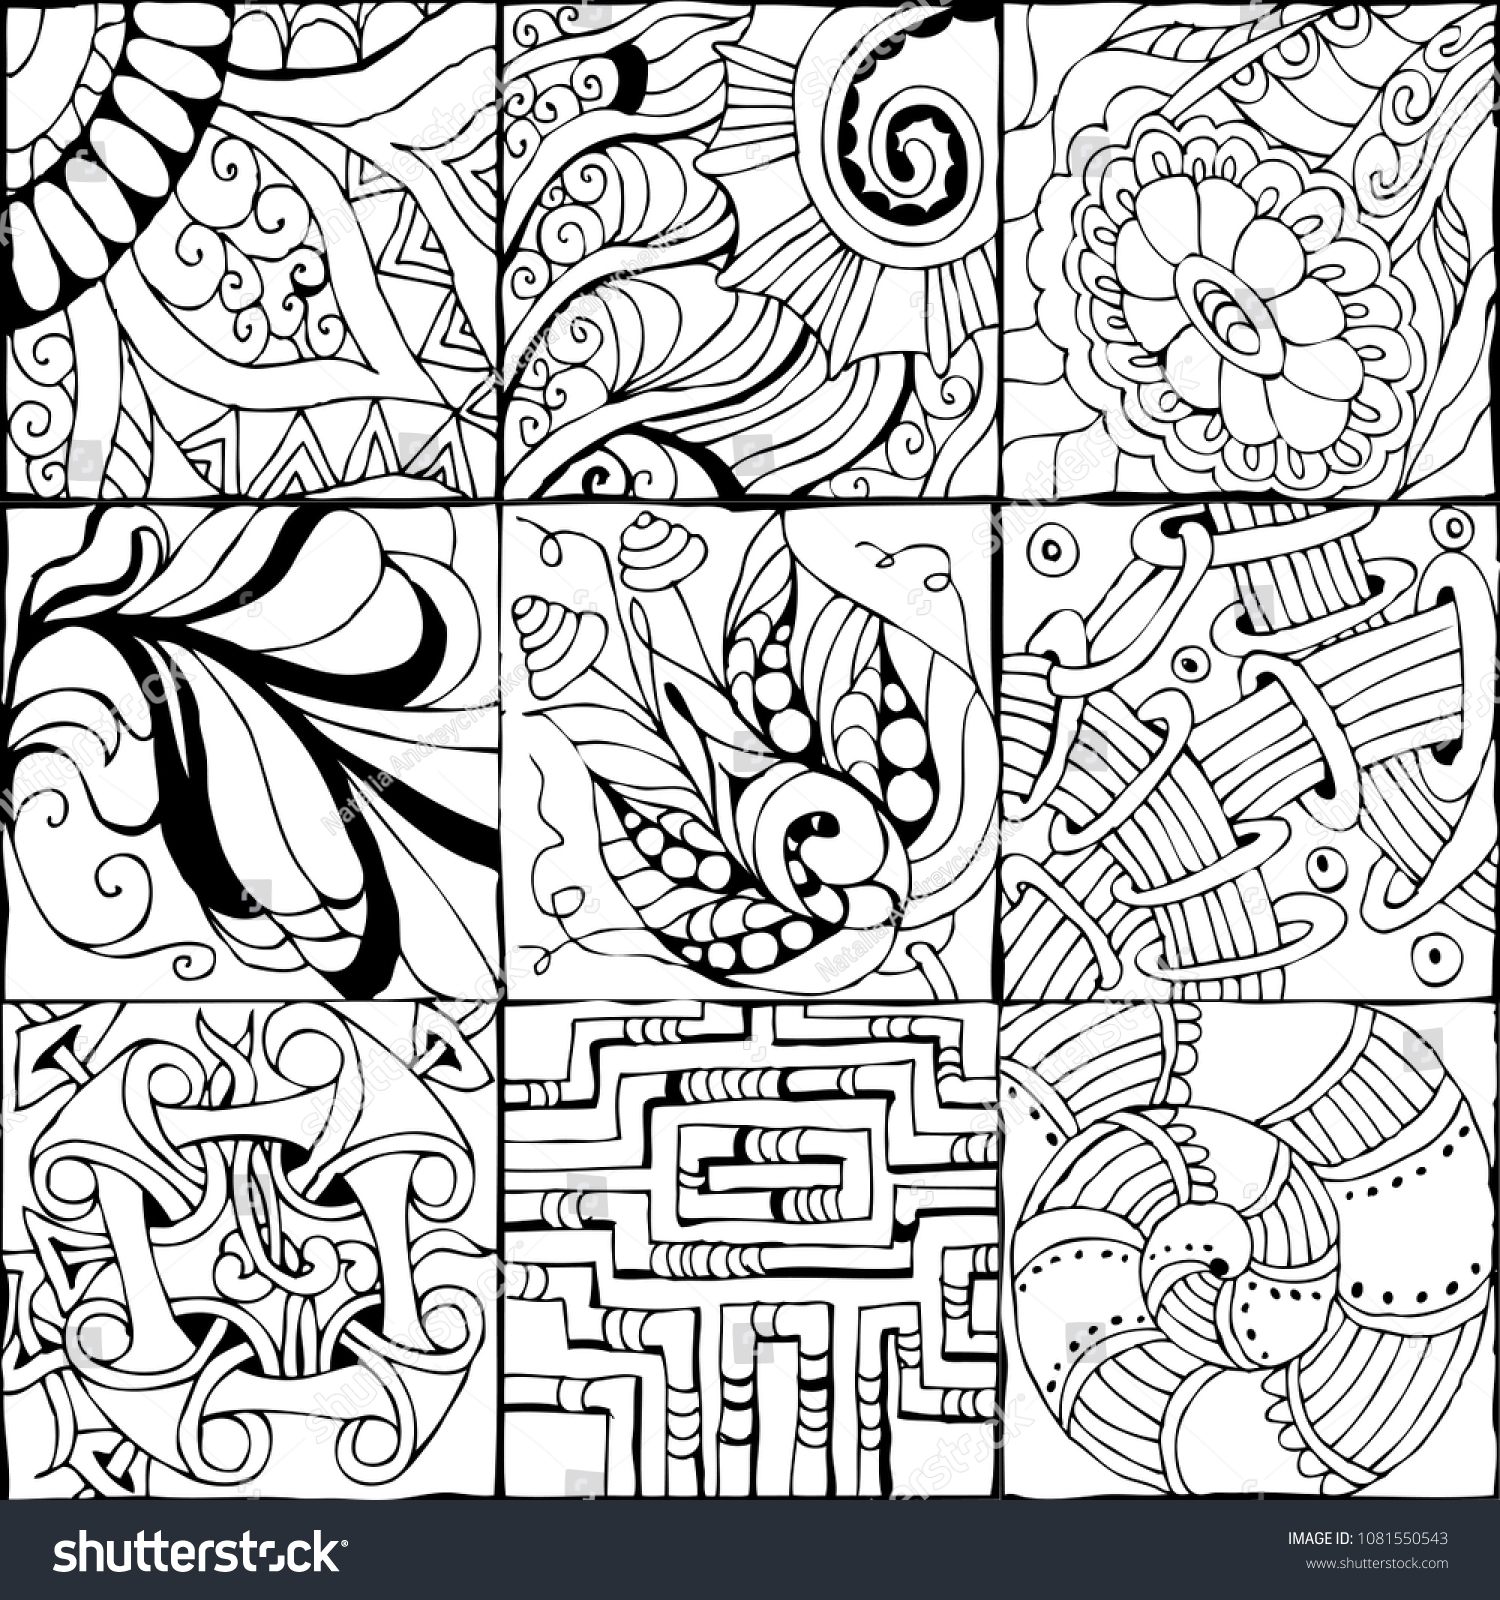 Hand Drawn Zentangle Background Coloring Page Stock Vector (Royalty ...